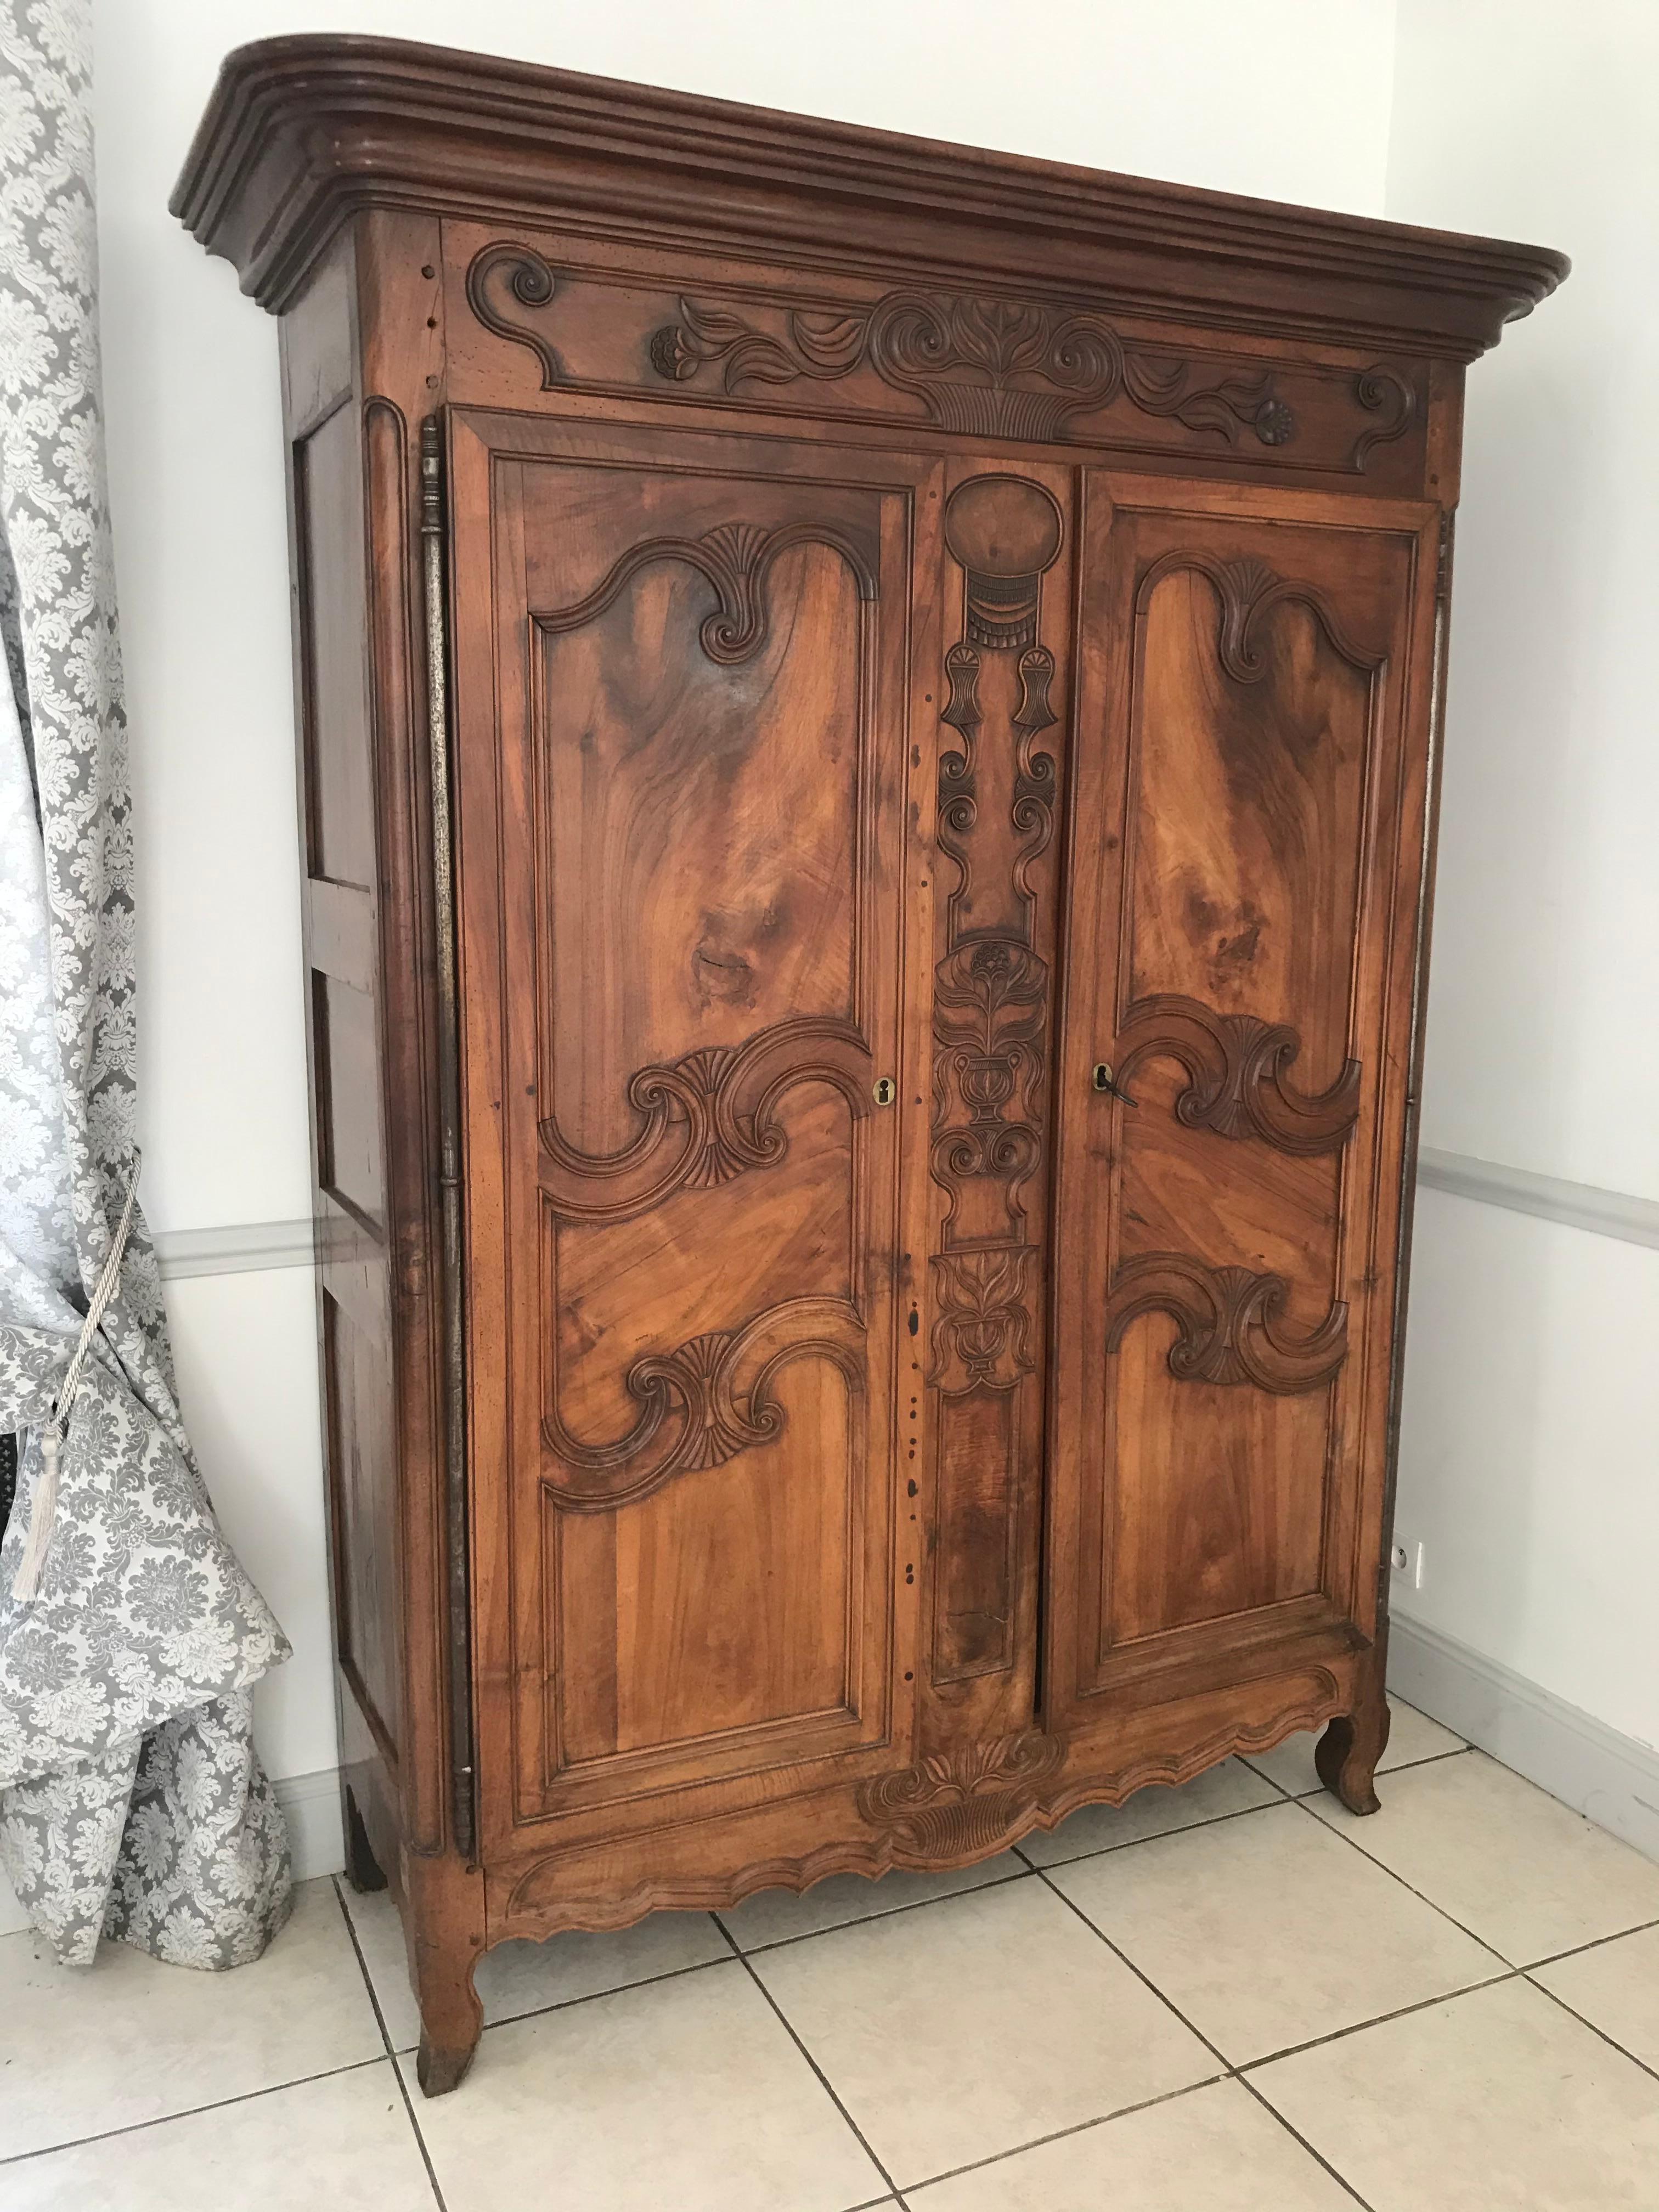 Charming Bresse cabinet from the 18th century. It is made of various fruit woods. It opens in front of two doors whose panels are carved of curves and counter-curves.The overflowing cornice is flat and molded. There are very beautiful decorations of